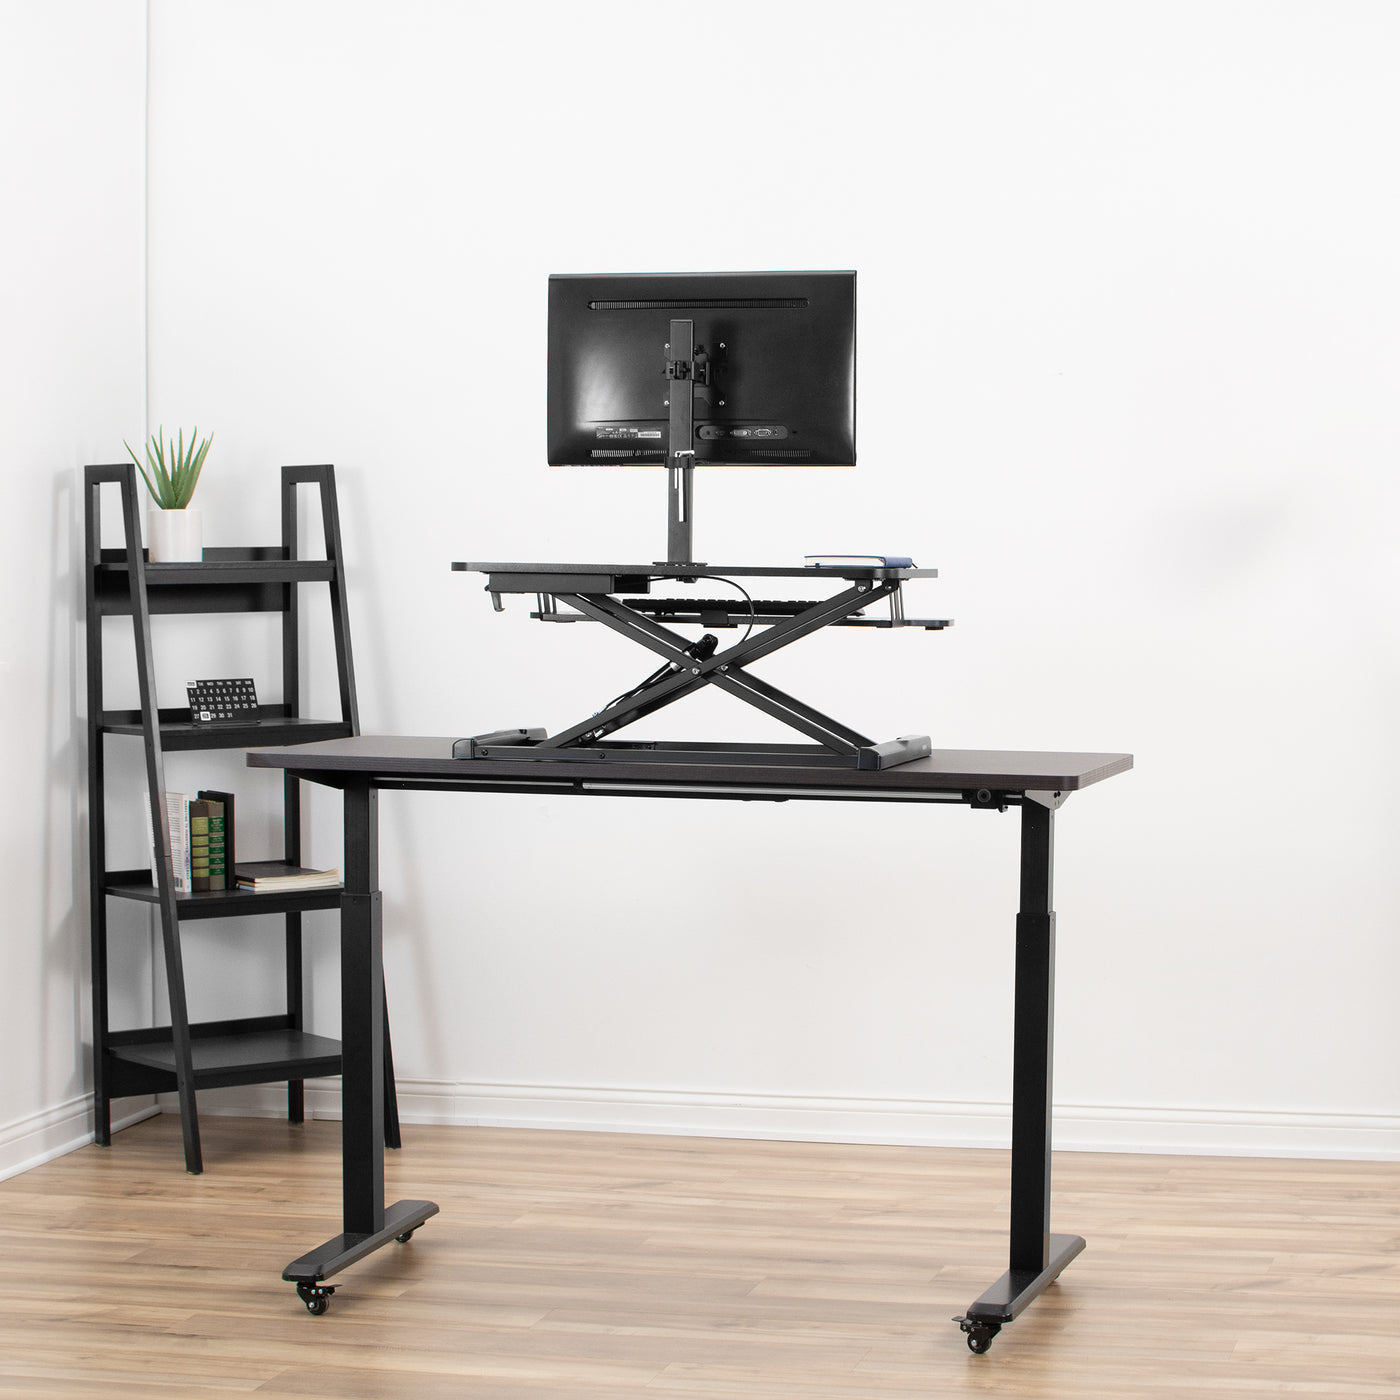 Sturdy X-frame support of the desk converter will securely support your office equipment.